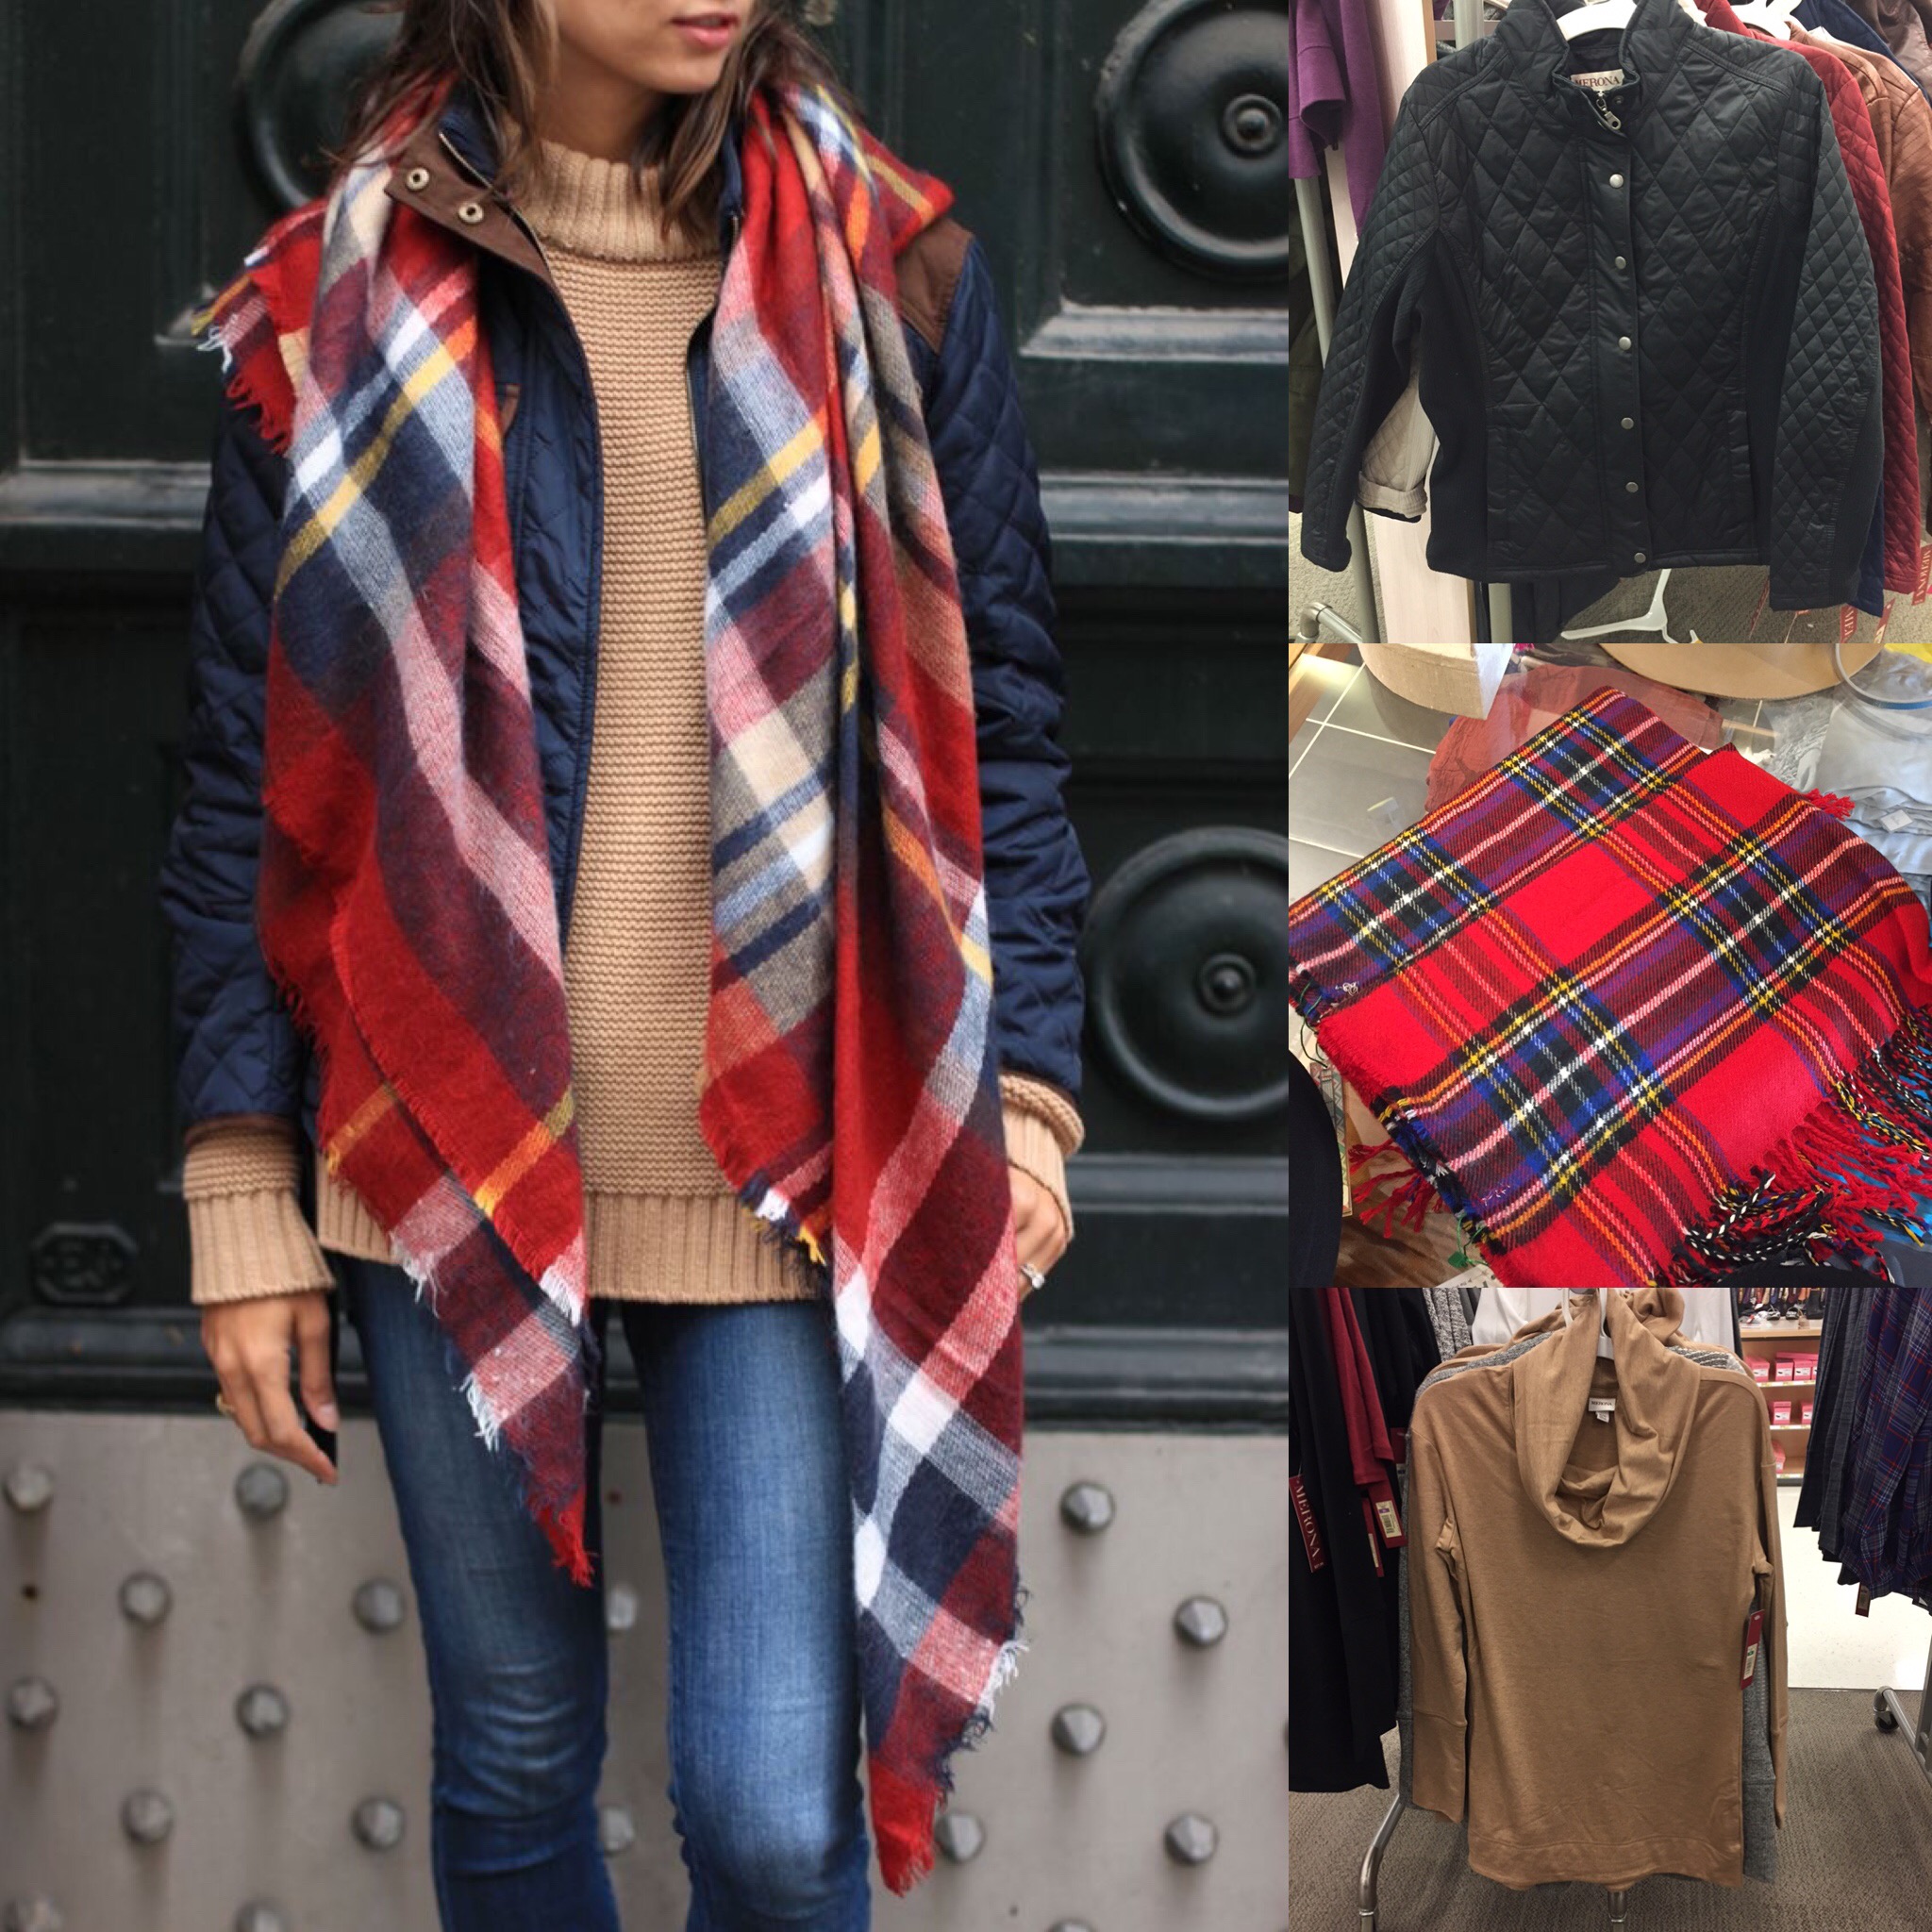 Fall outfit inspiration featuring blanket scarf, quilted jacket and camel sweater